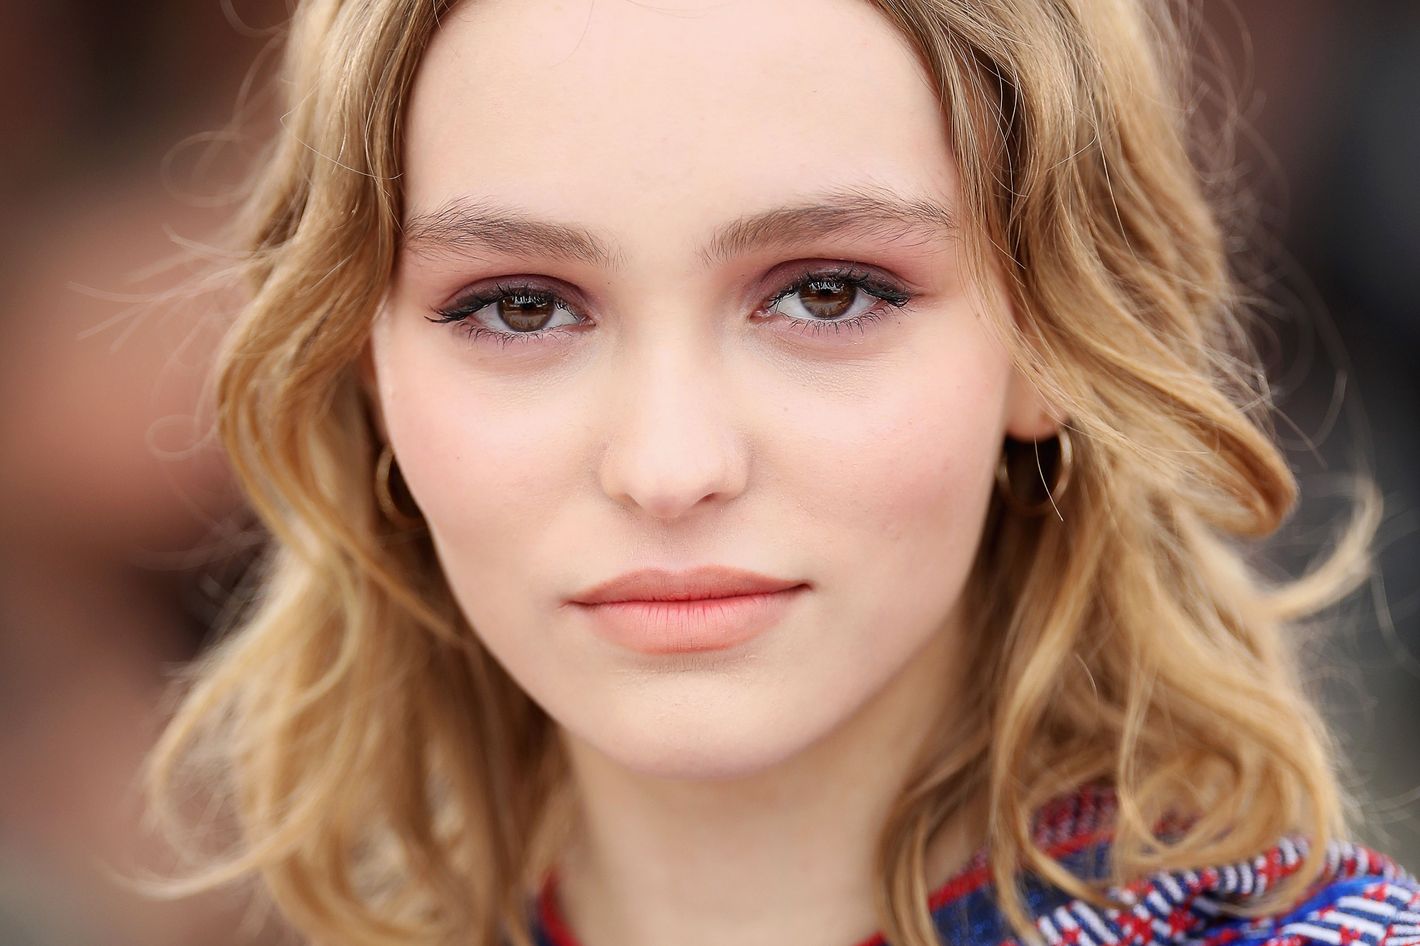 Lily-Rose Depp is the face of Chanel's No.5 L'Eau fragrance